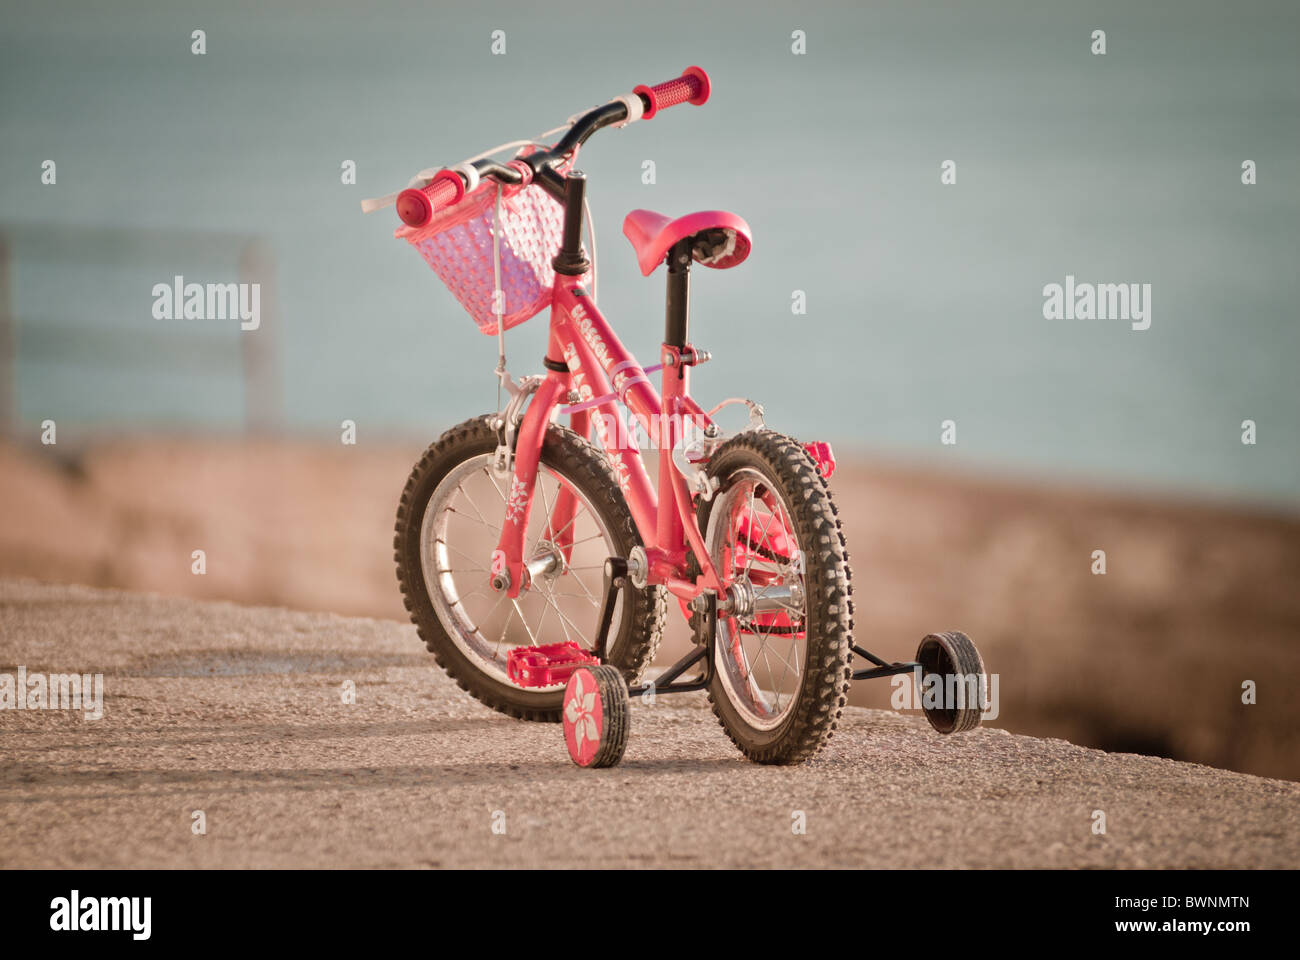 Pink girls bicycle with stabilizers Stock Photo